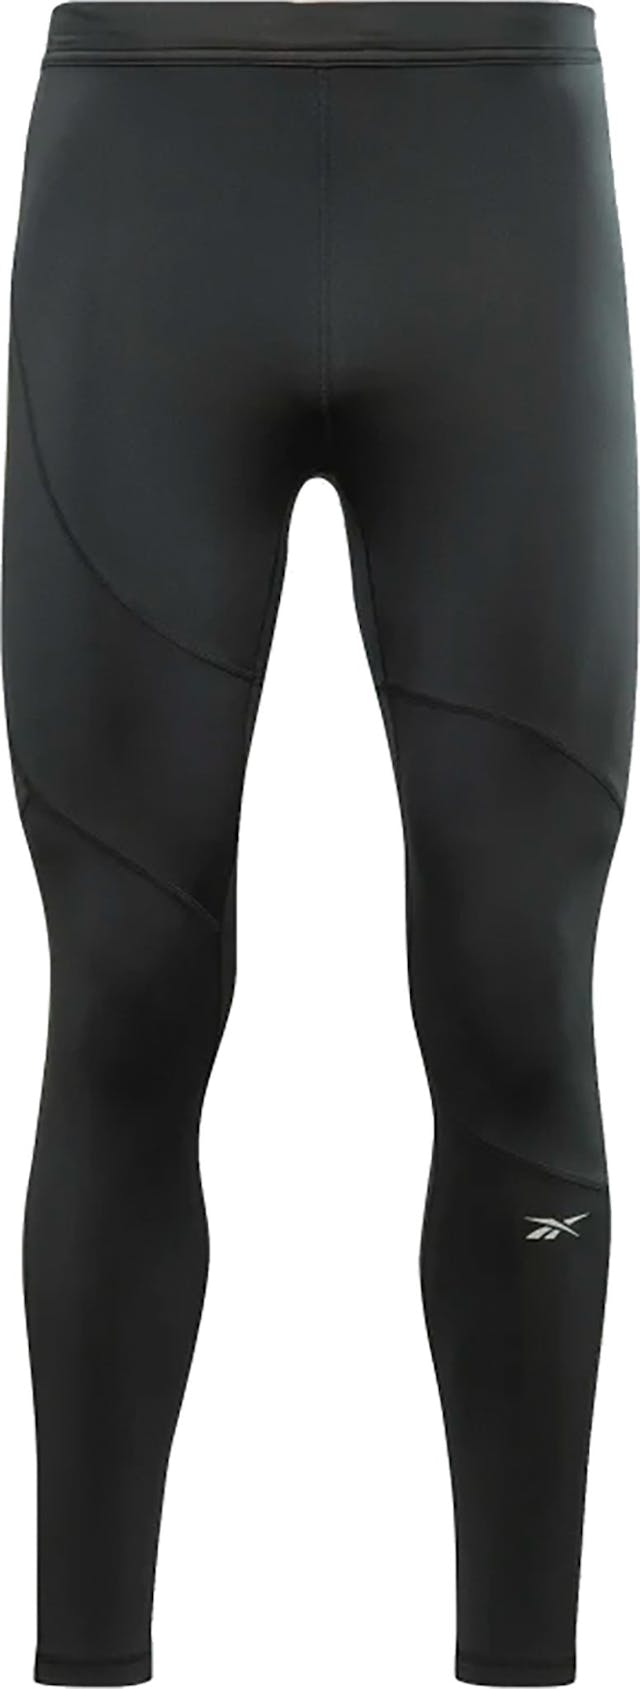 Product image for Running Speedwick Tights - Men's